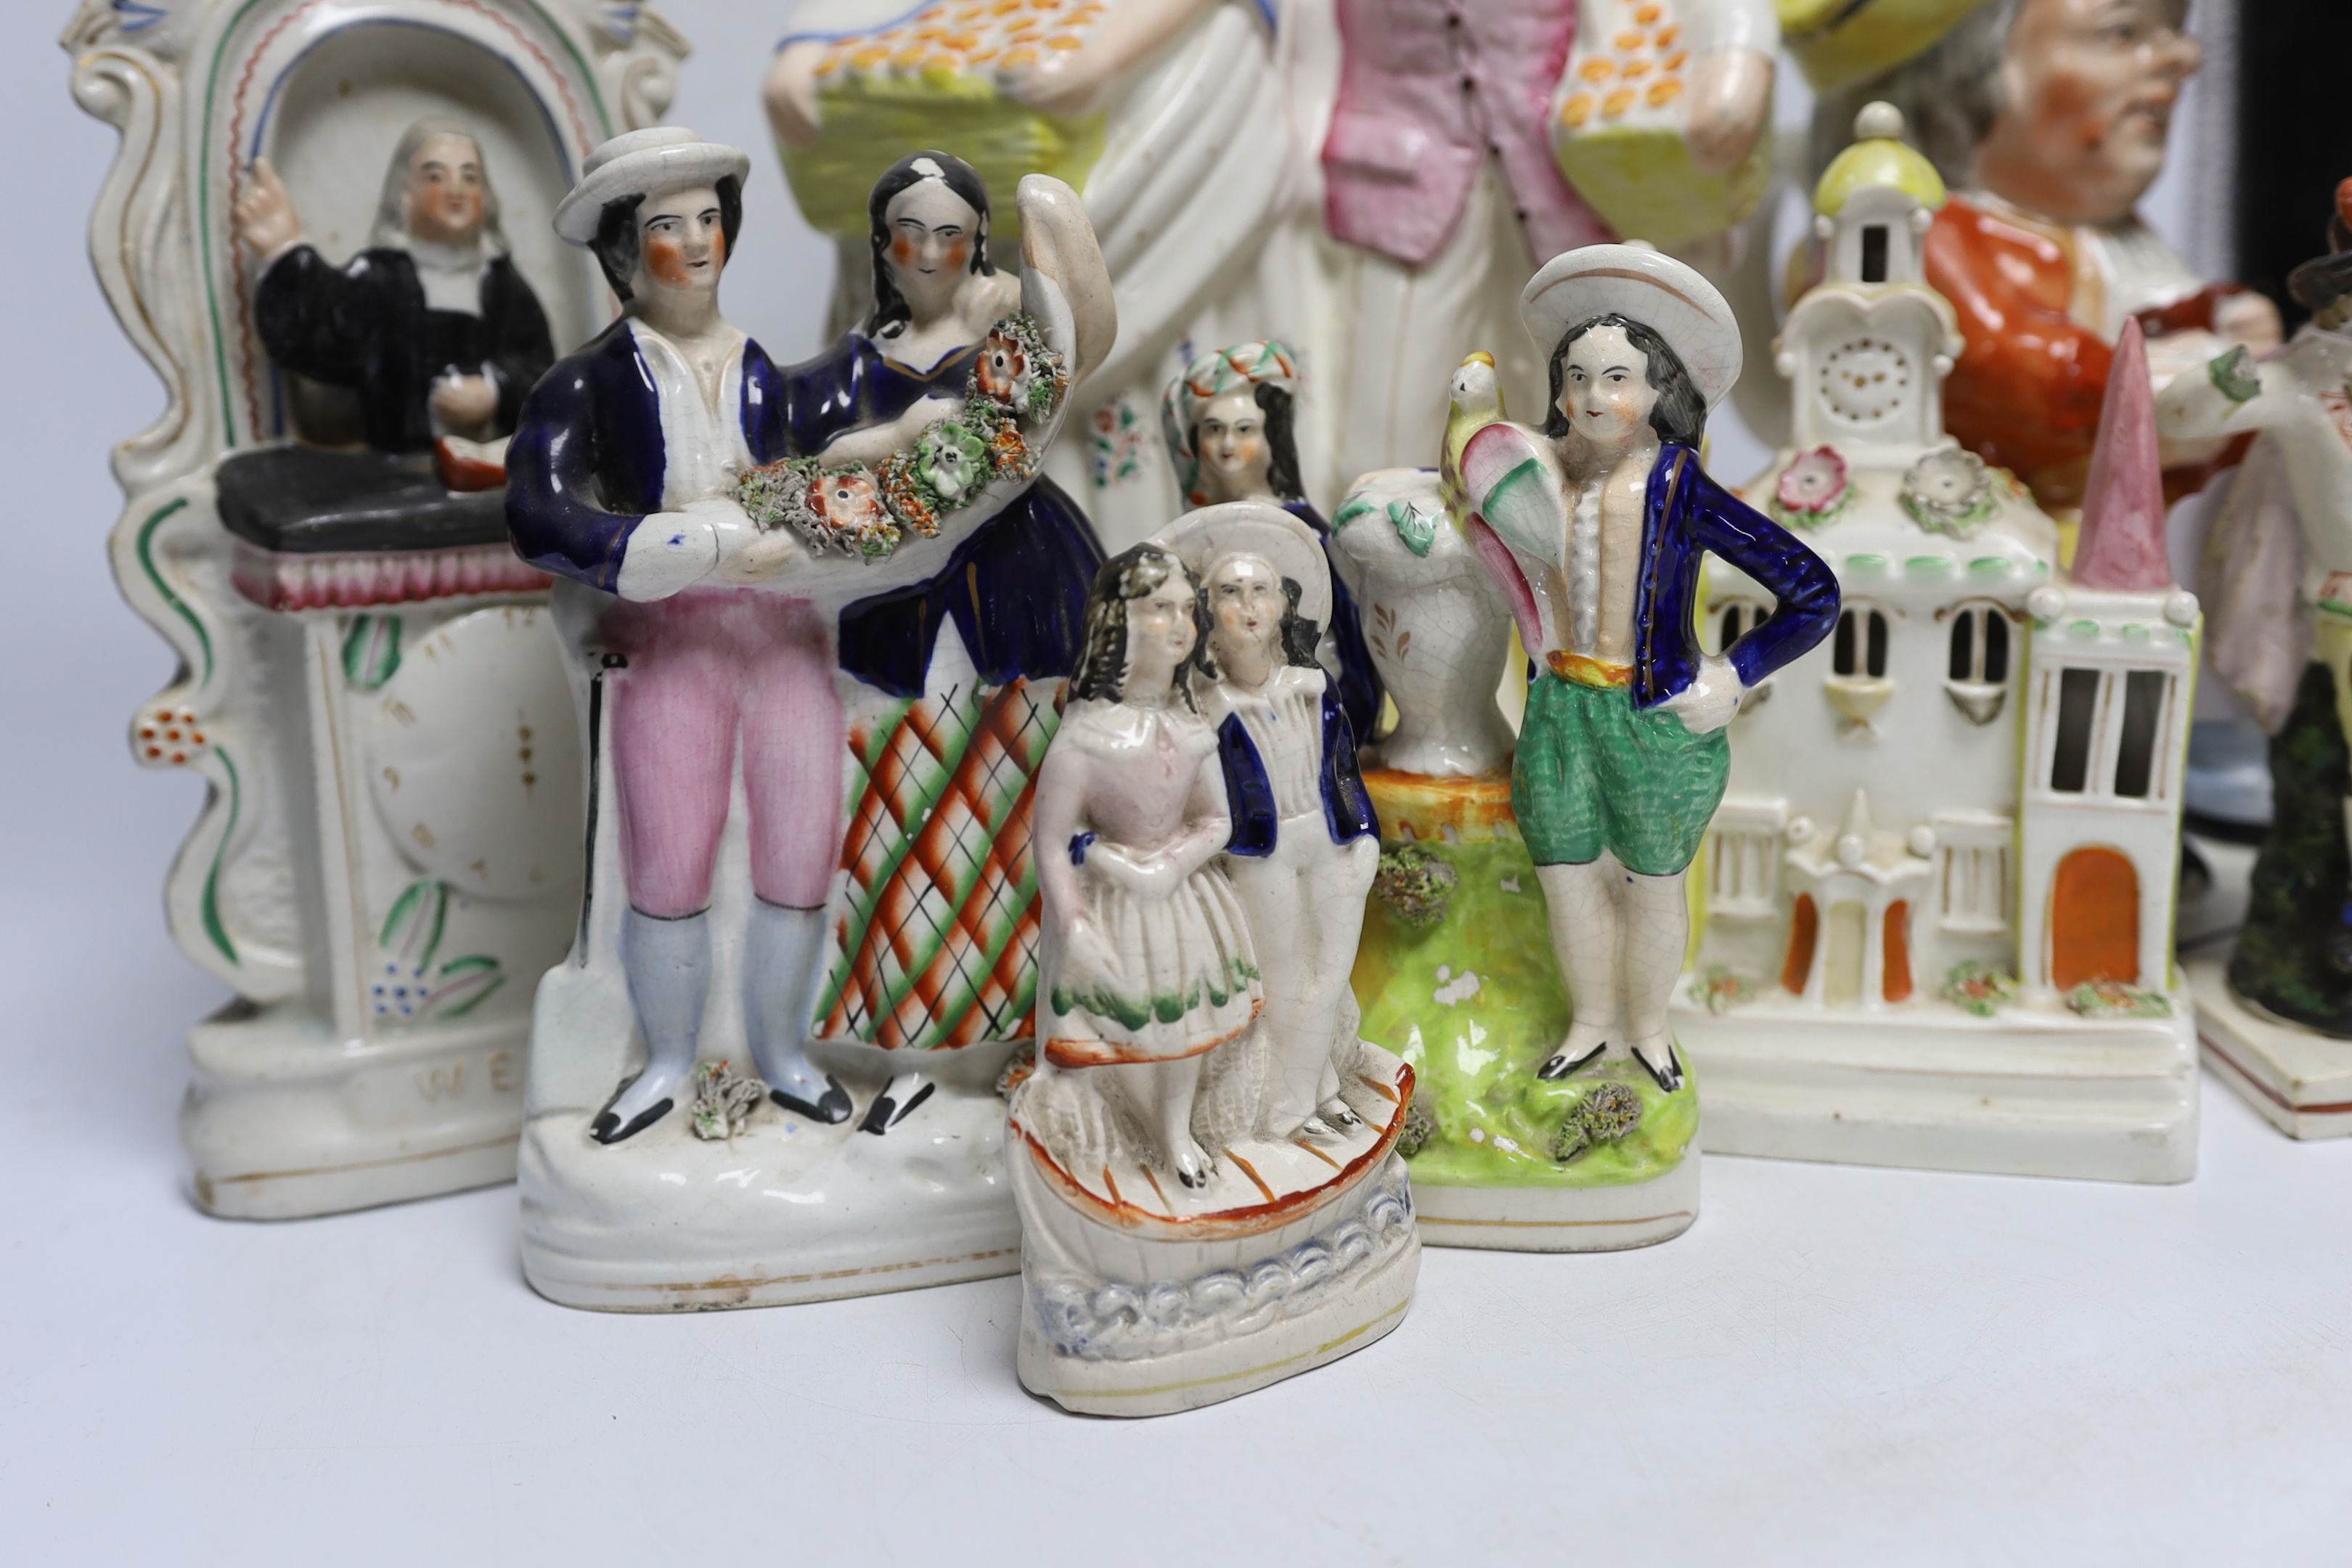 Seven 19th century Staffordshire figure groups including Orange Sellers and Wesley, together with a Toby jug, 35cm high